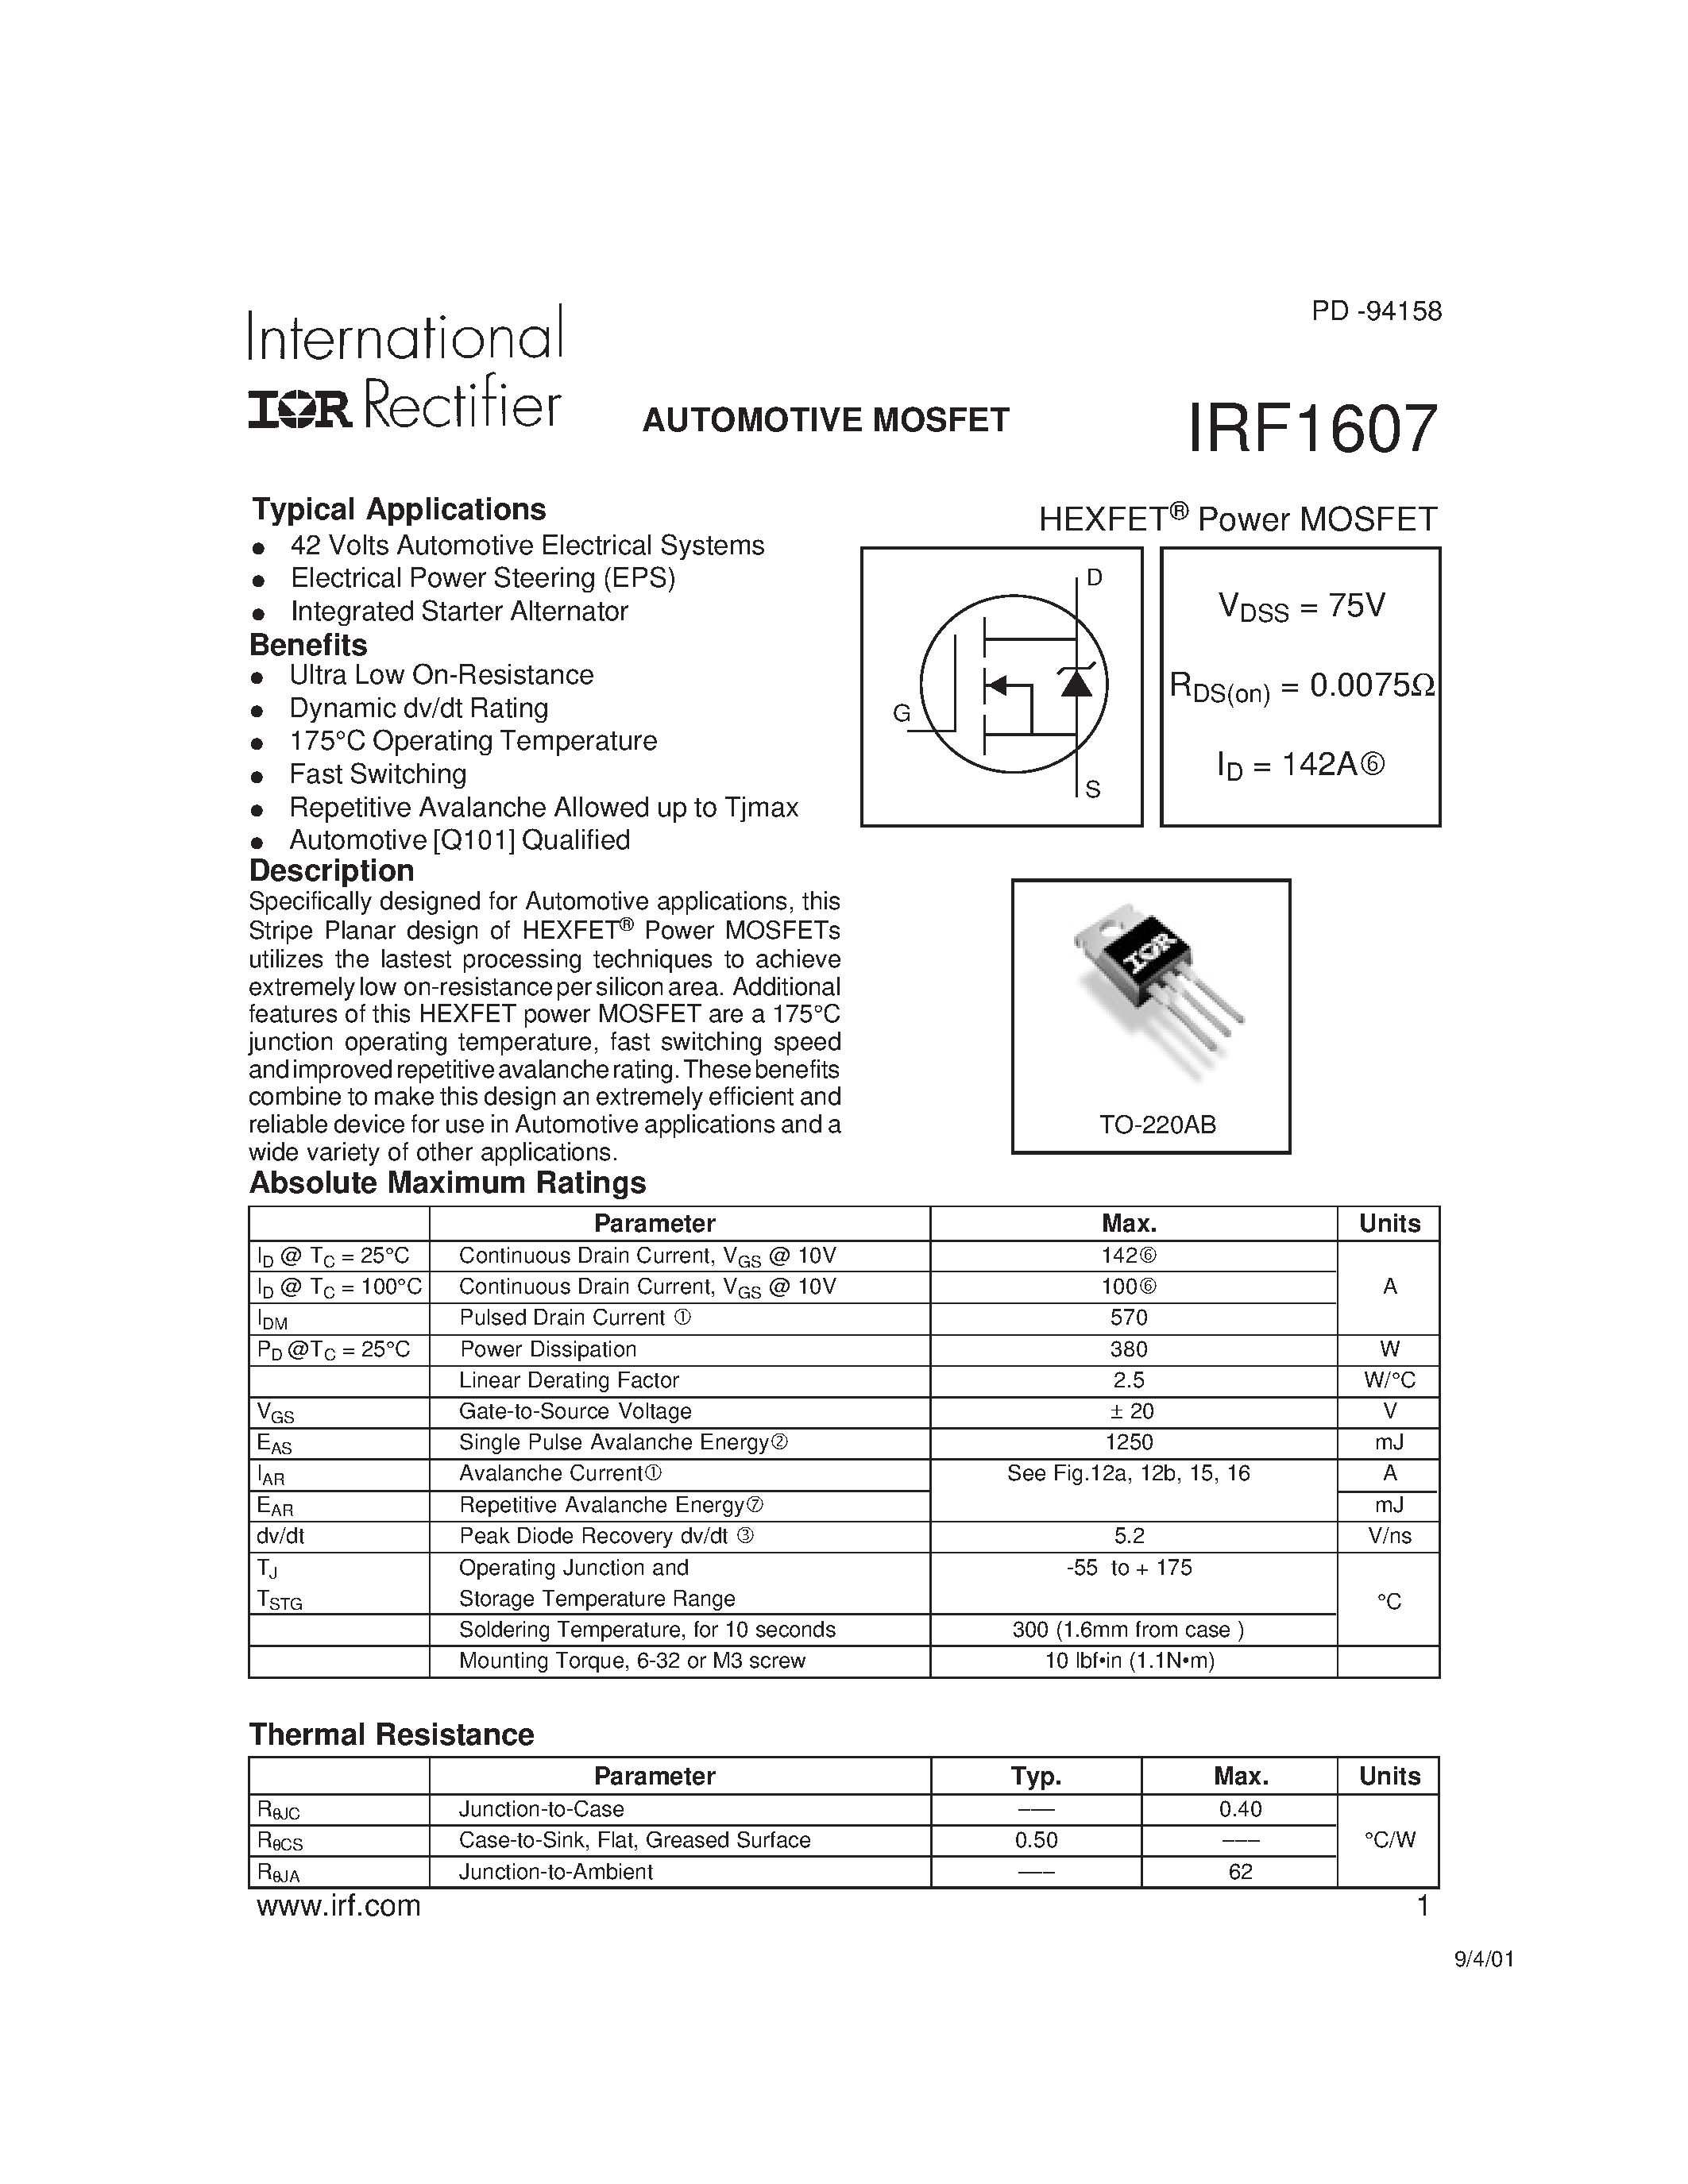 Datasheet IRF1607 - Power MOSFET(Vdss=75V/ Rds(on)=0.0075ohm/ Id=142A) page 1